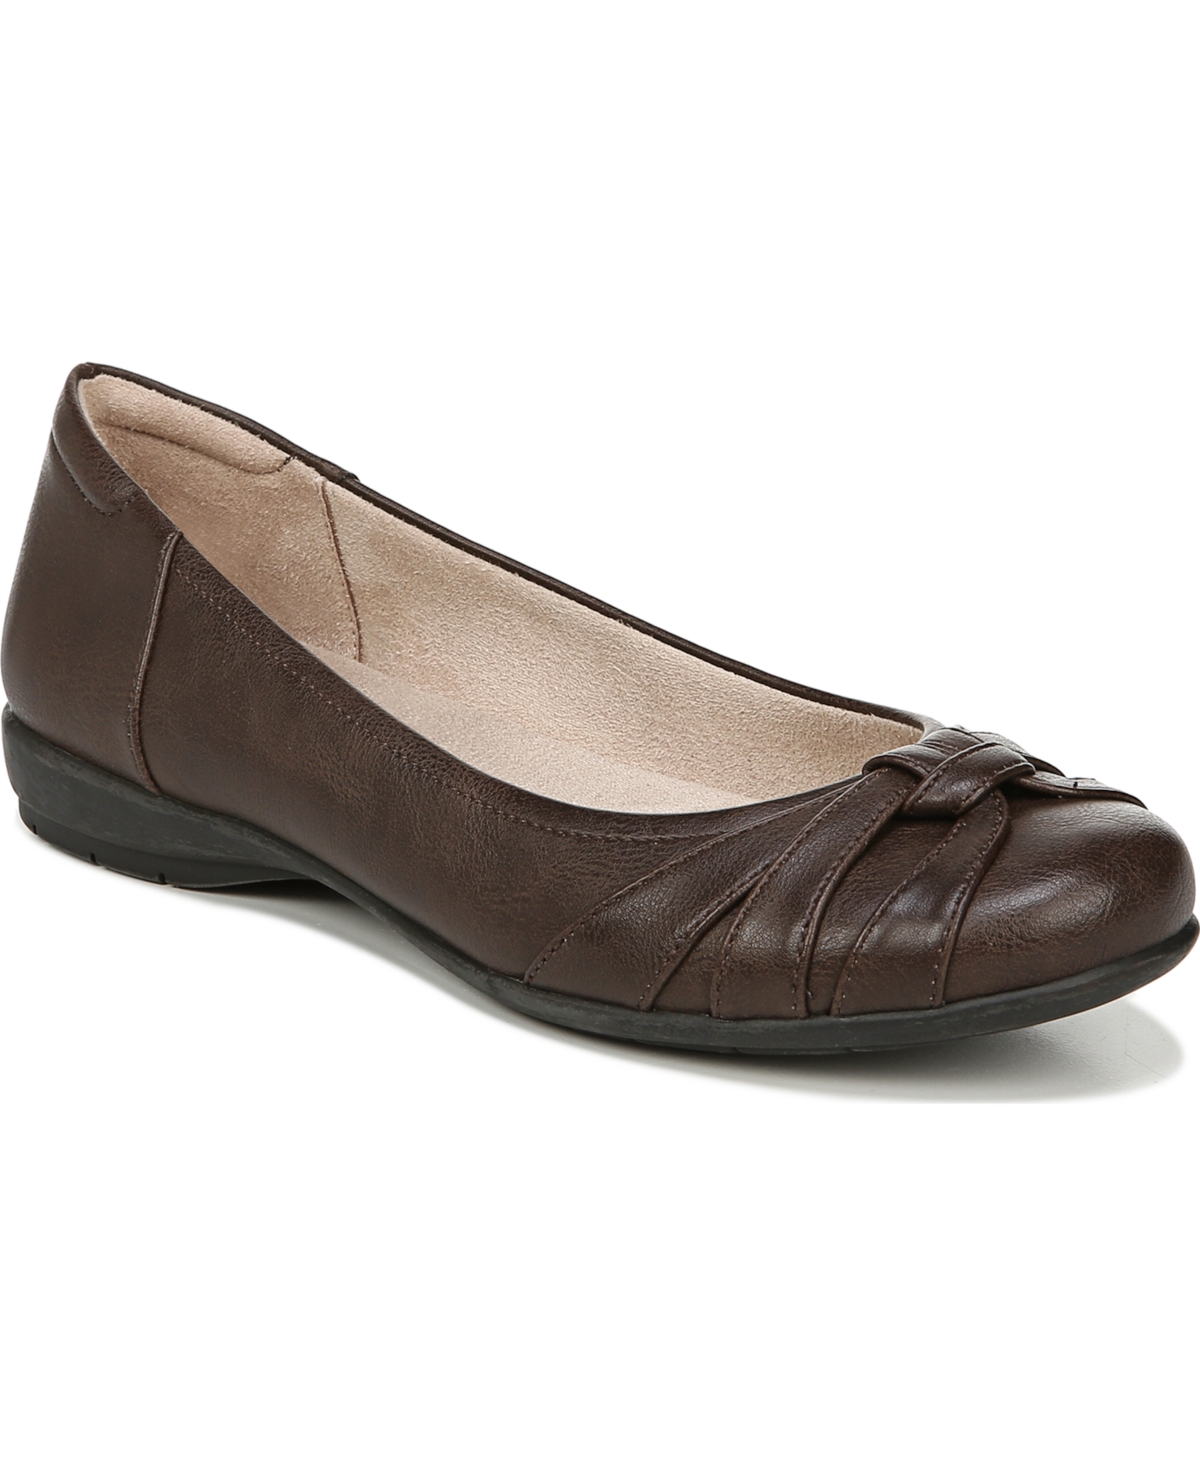 UPC 736705003342 product image for Soul Naturalizer Gift Flats Women's Shoes | upcitemdb.com